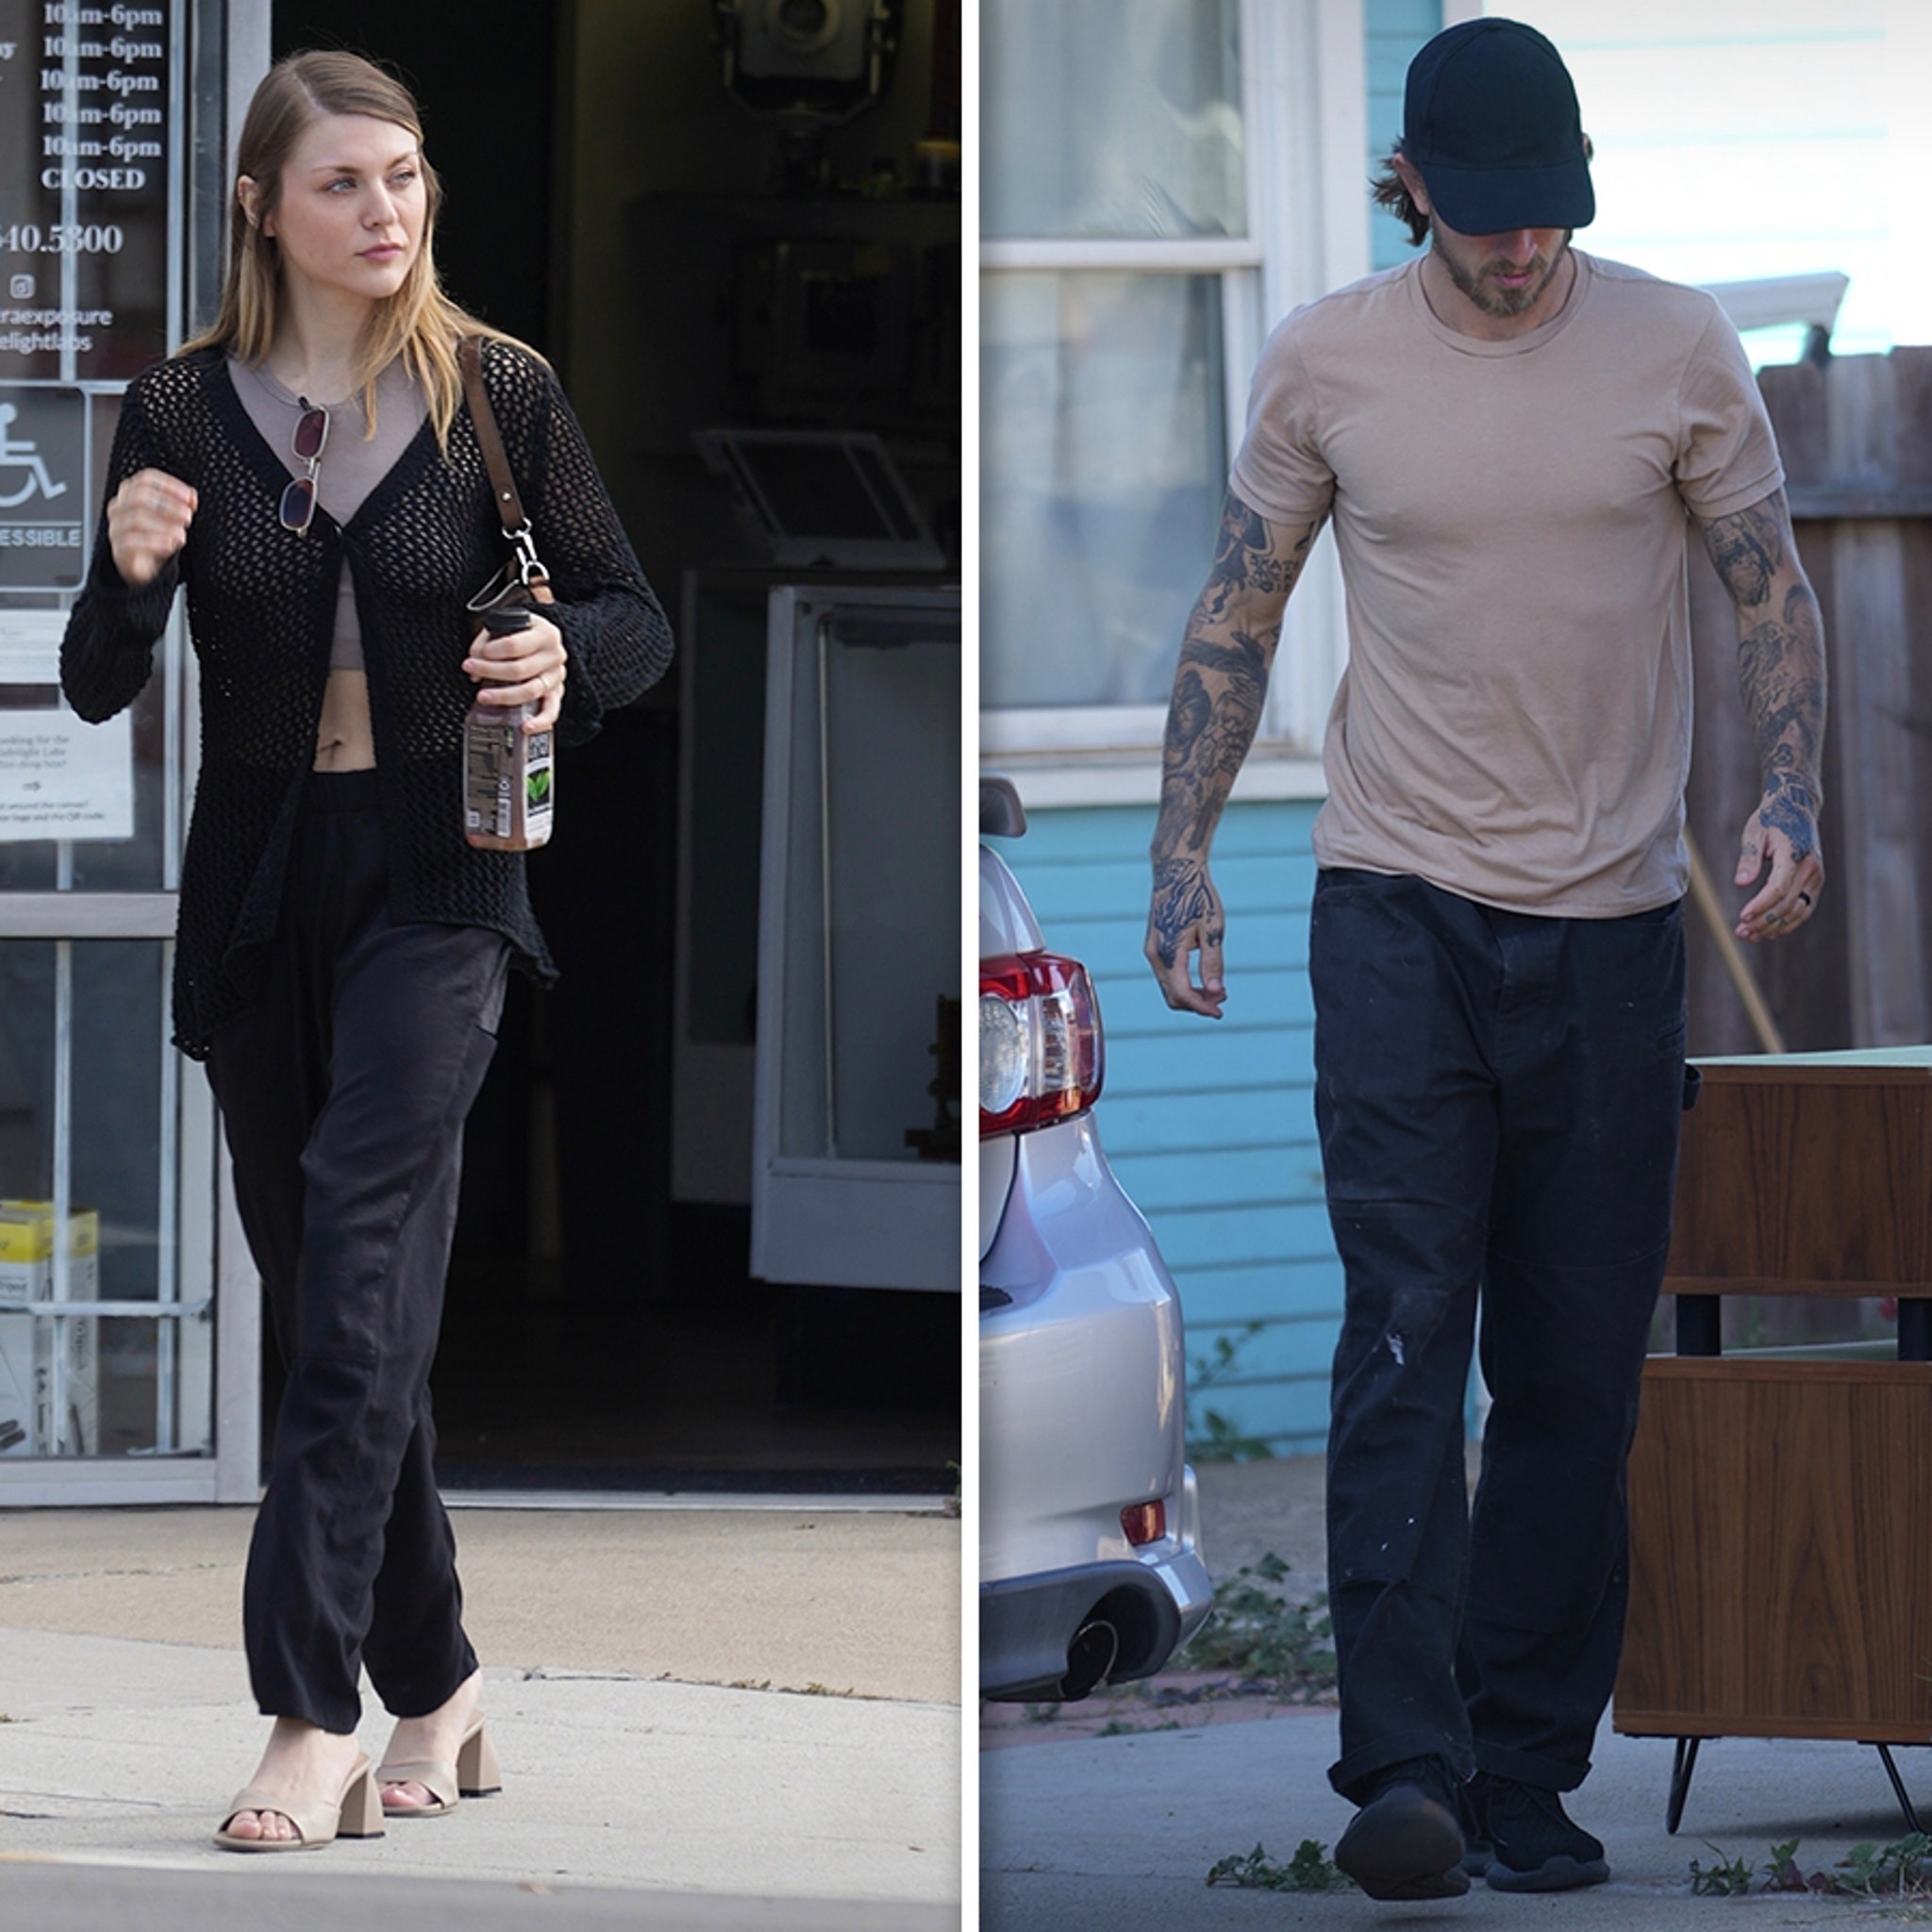 Frances Bean Cobain and Riley Hawk are reportedly dating